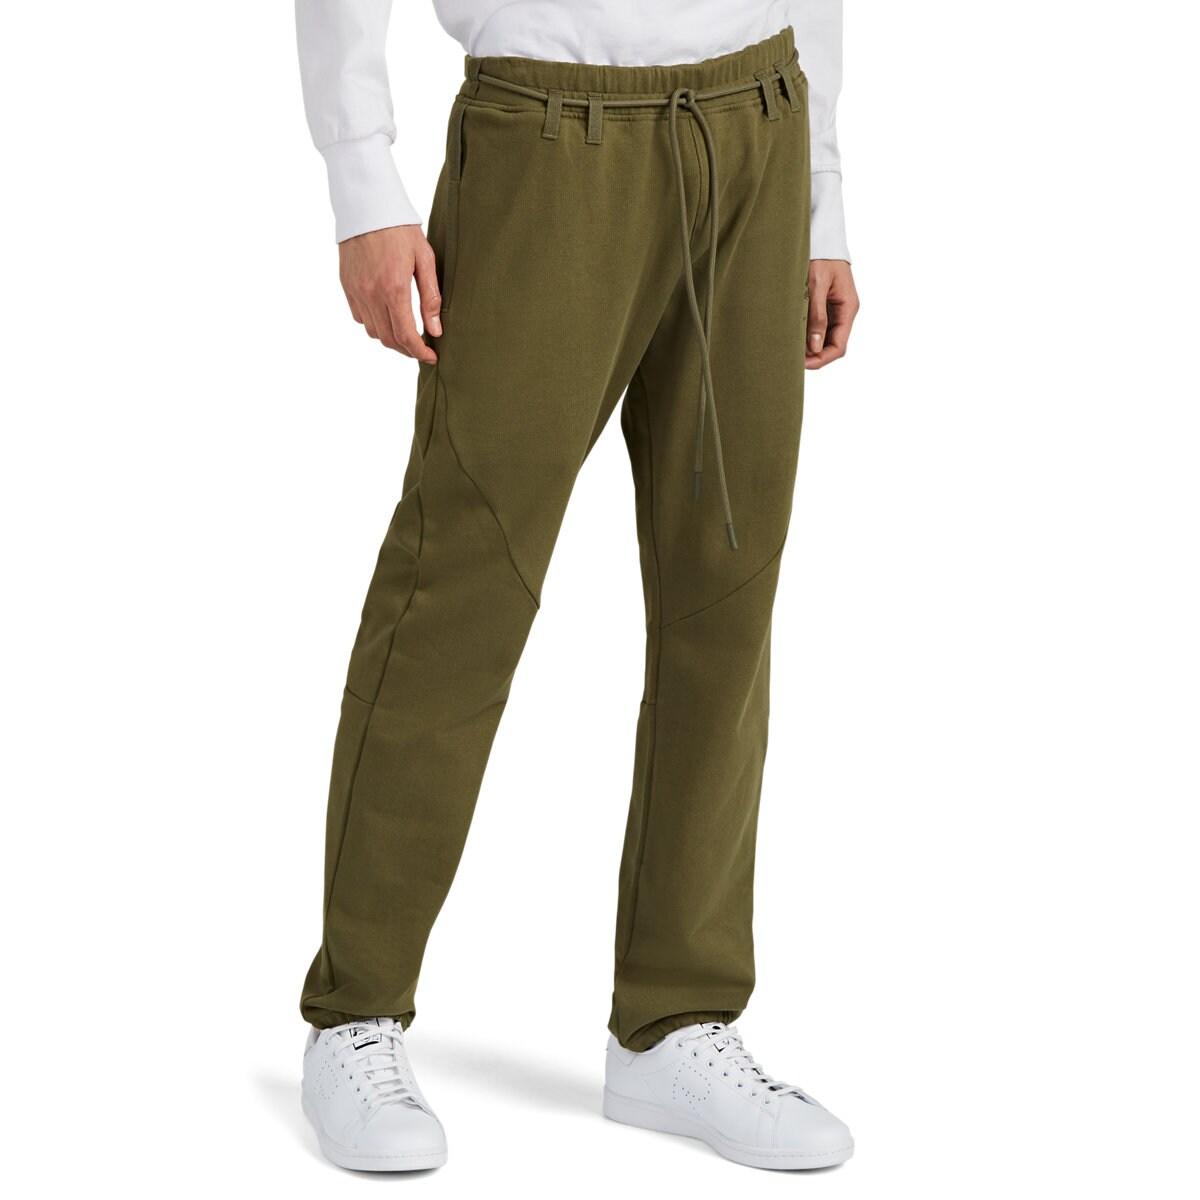 adidas Cotton French Terry Sweatpants in Olive (Green) for Men - Lyst